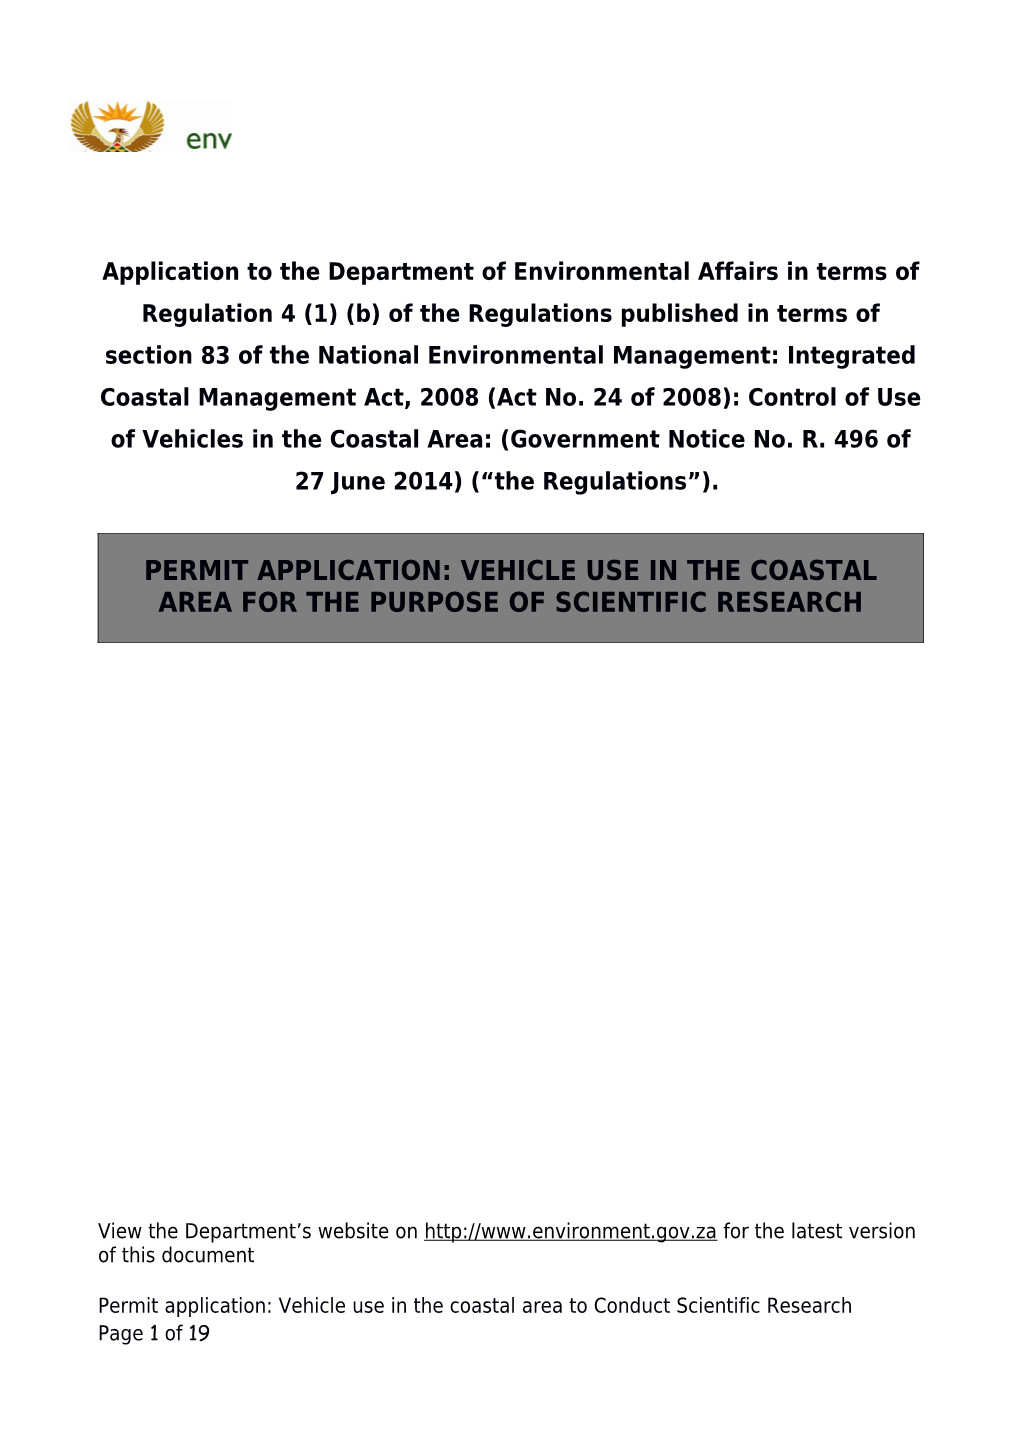 Permit Application: Vehicle Use in the Coastal Area for the Purpose of Scientific Research